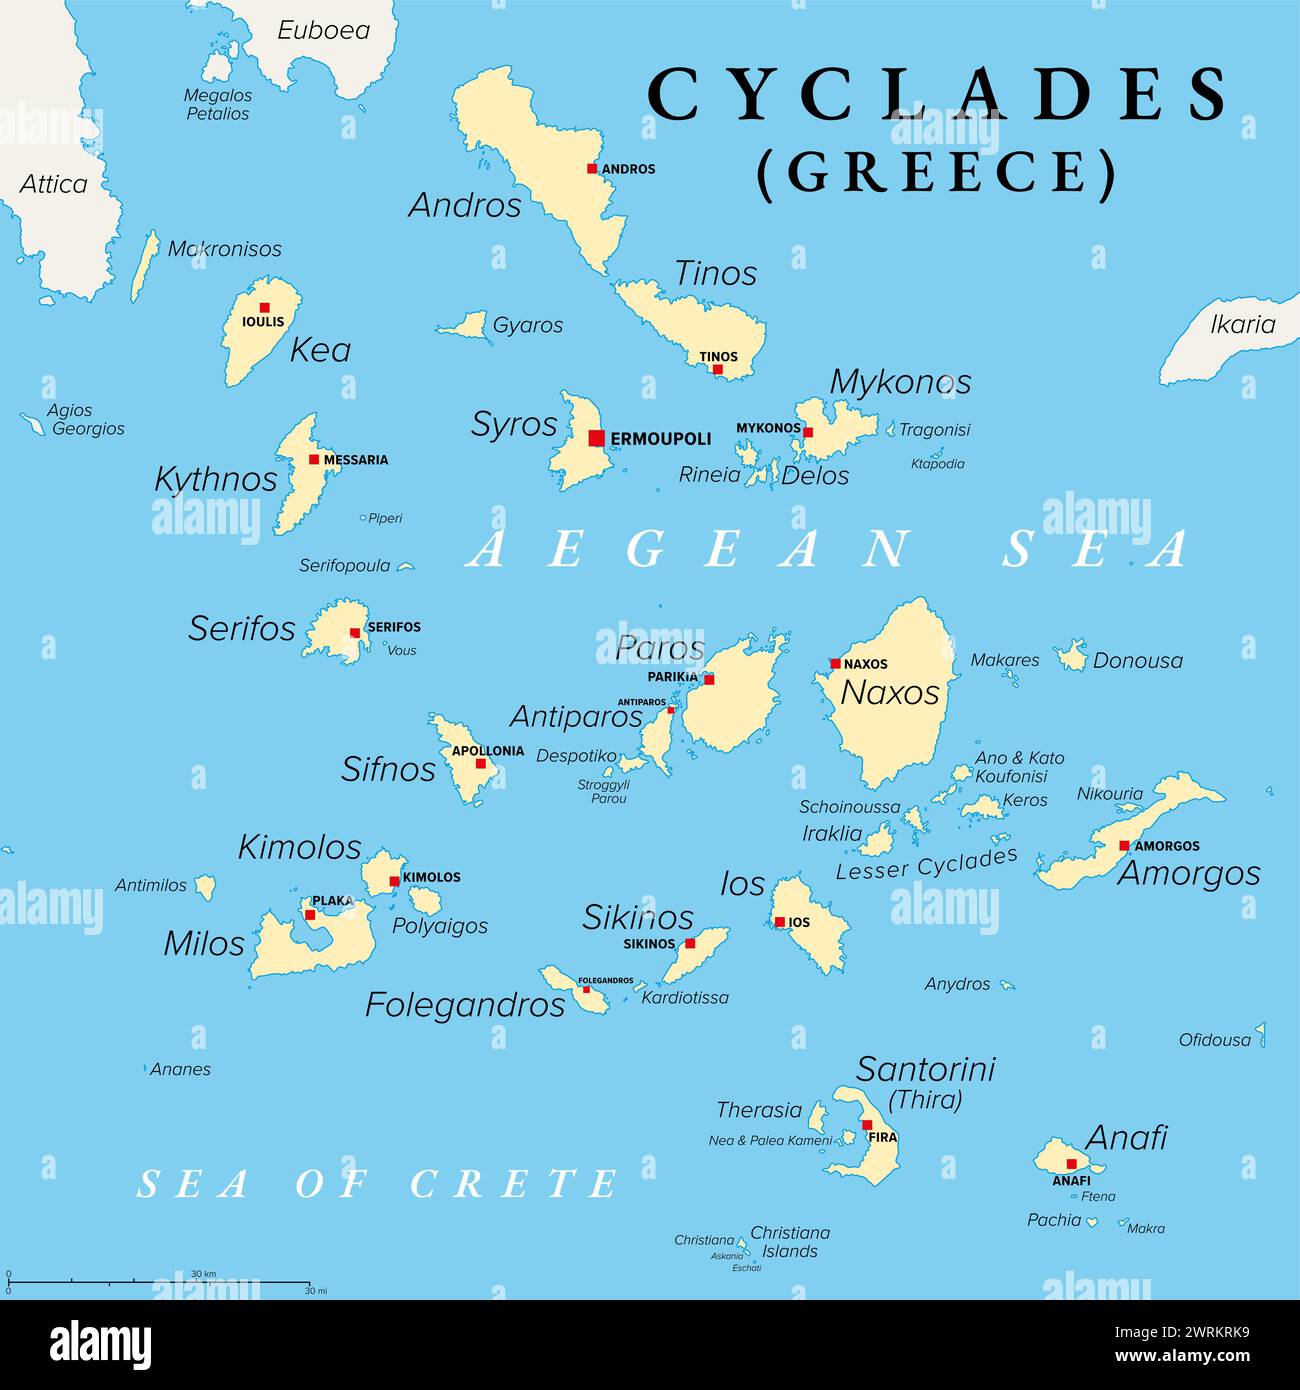 Cyclades, group of Greek islands in the Aegean Sea, political map. Southeast of mainland Greece. Stock Photo